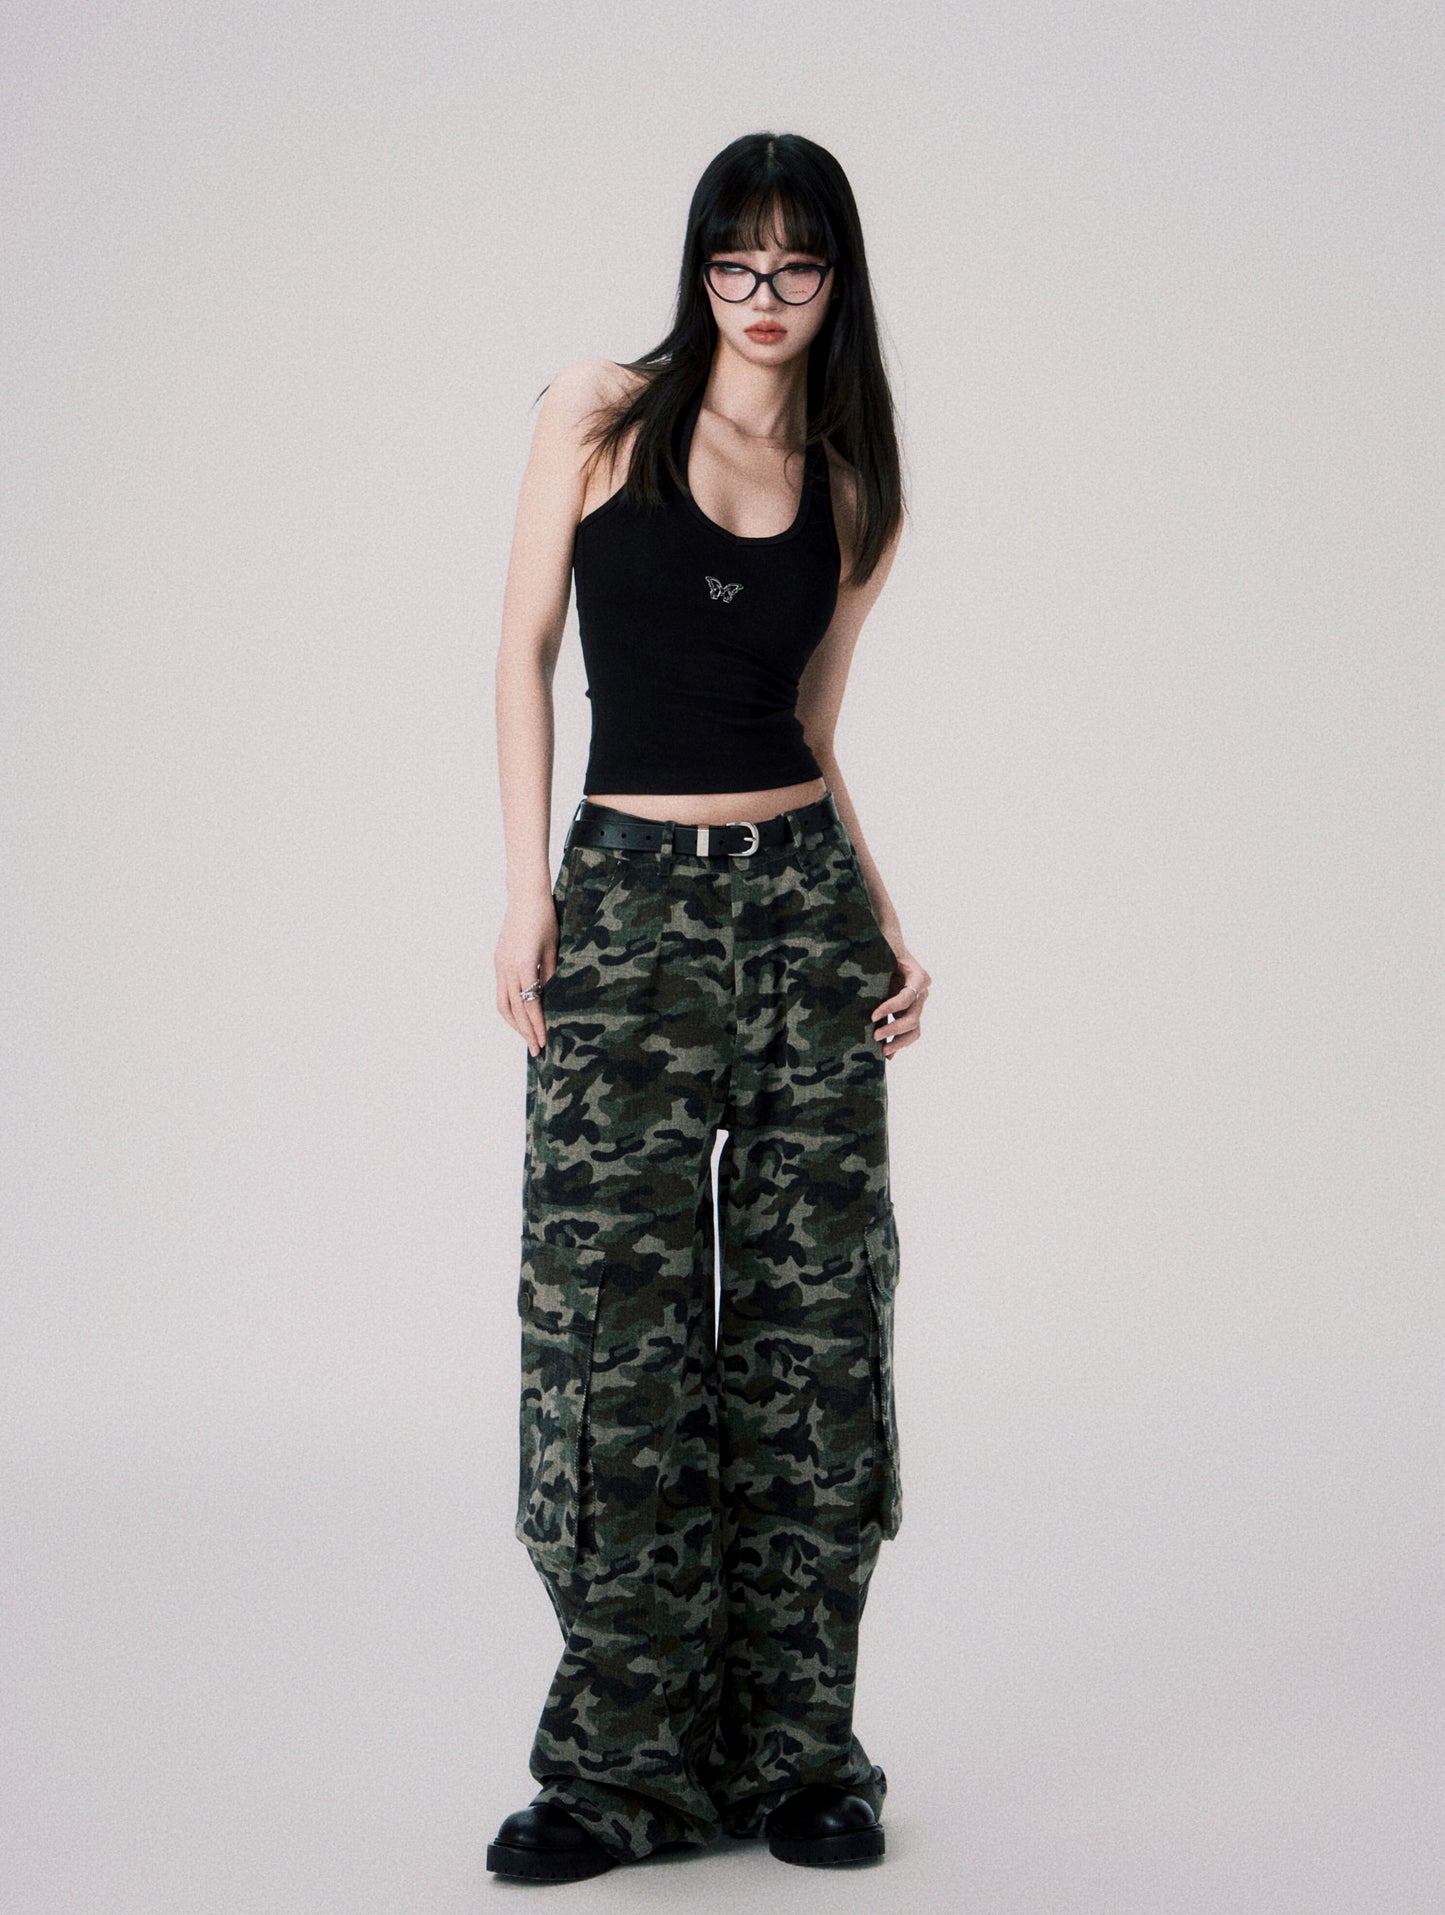 Loose Camouflage Cargo Pants - Casual Cool